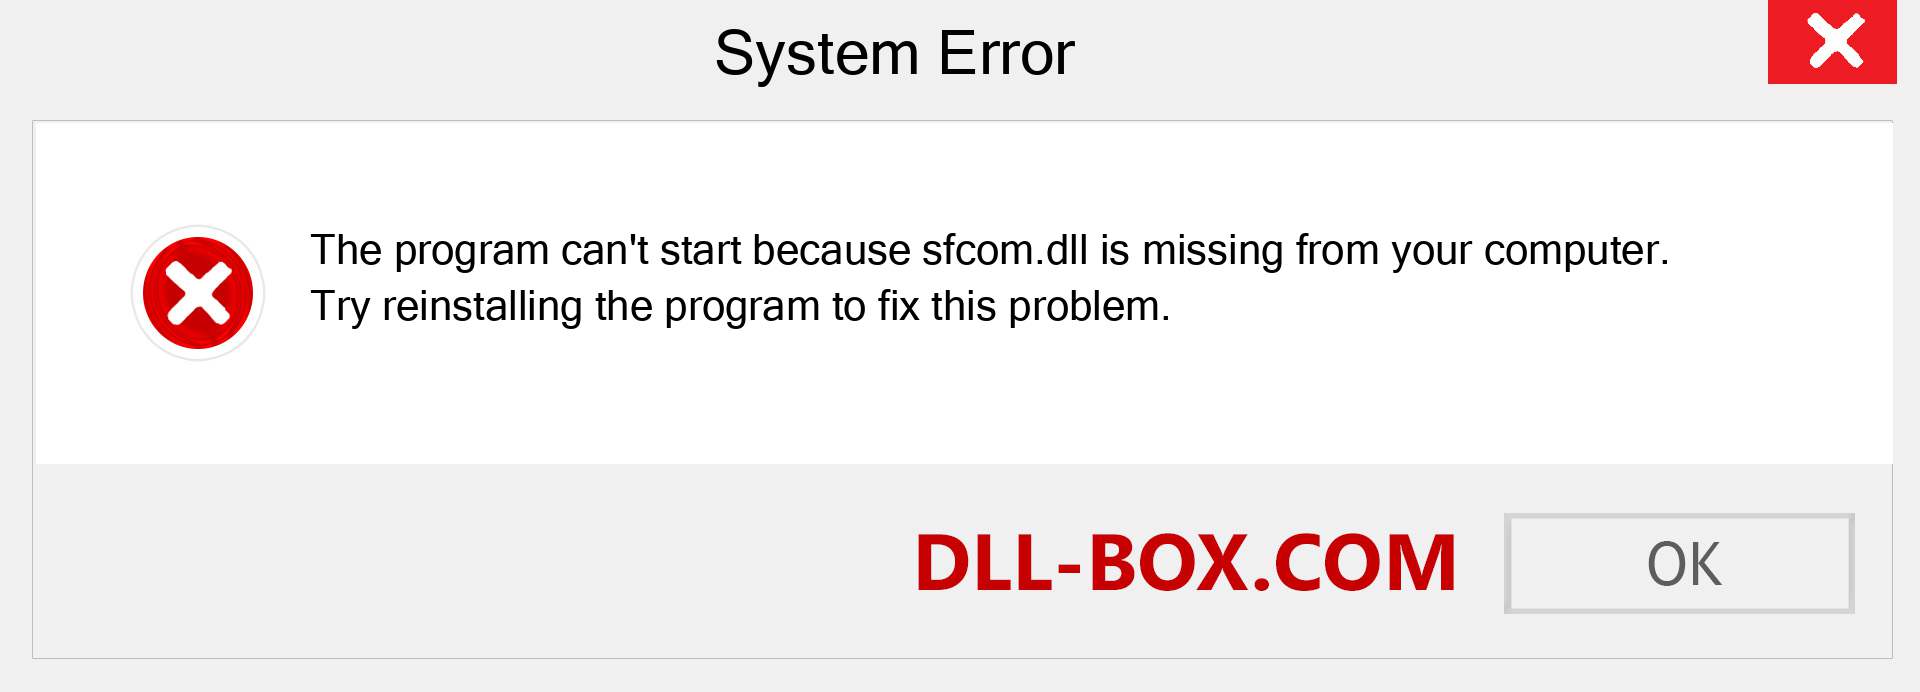  sfcom.dll file is missing?. Download for Windows 7, 8, 10 - Fix  sfcom dll Missing Error on Windows, photos, images